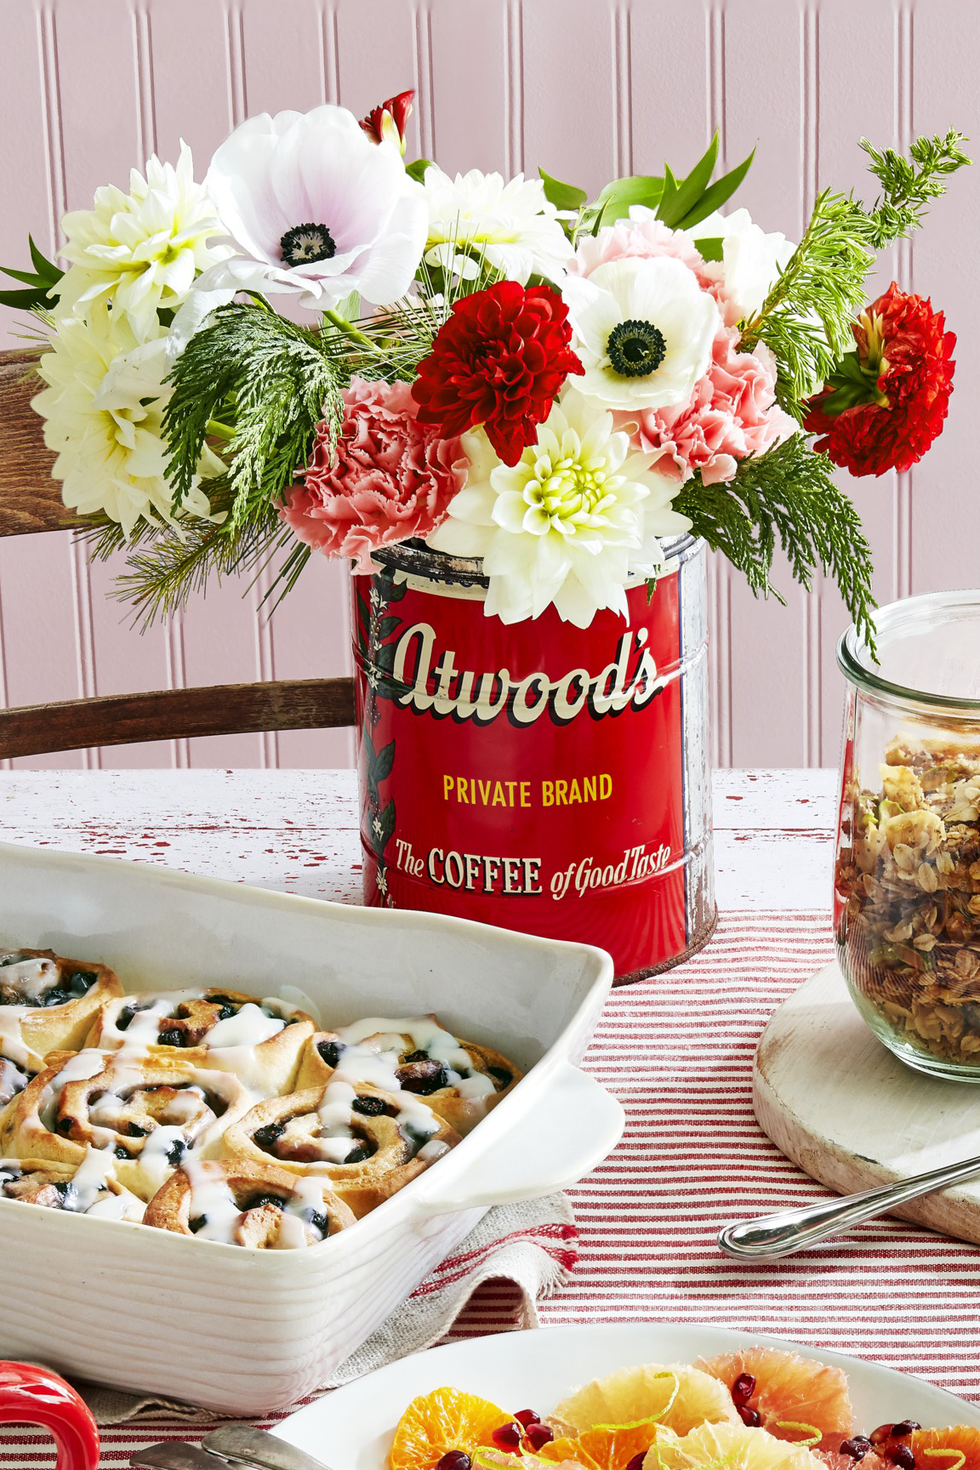 diy flower arrangements ideas coffee can with brunch meal